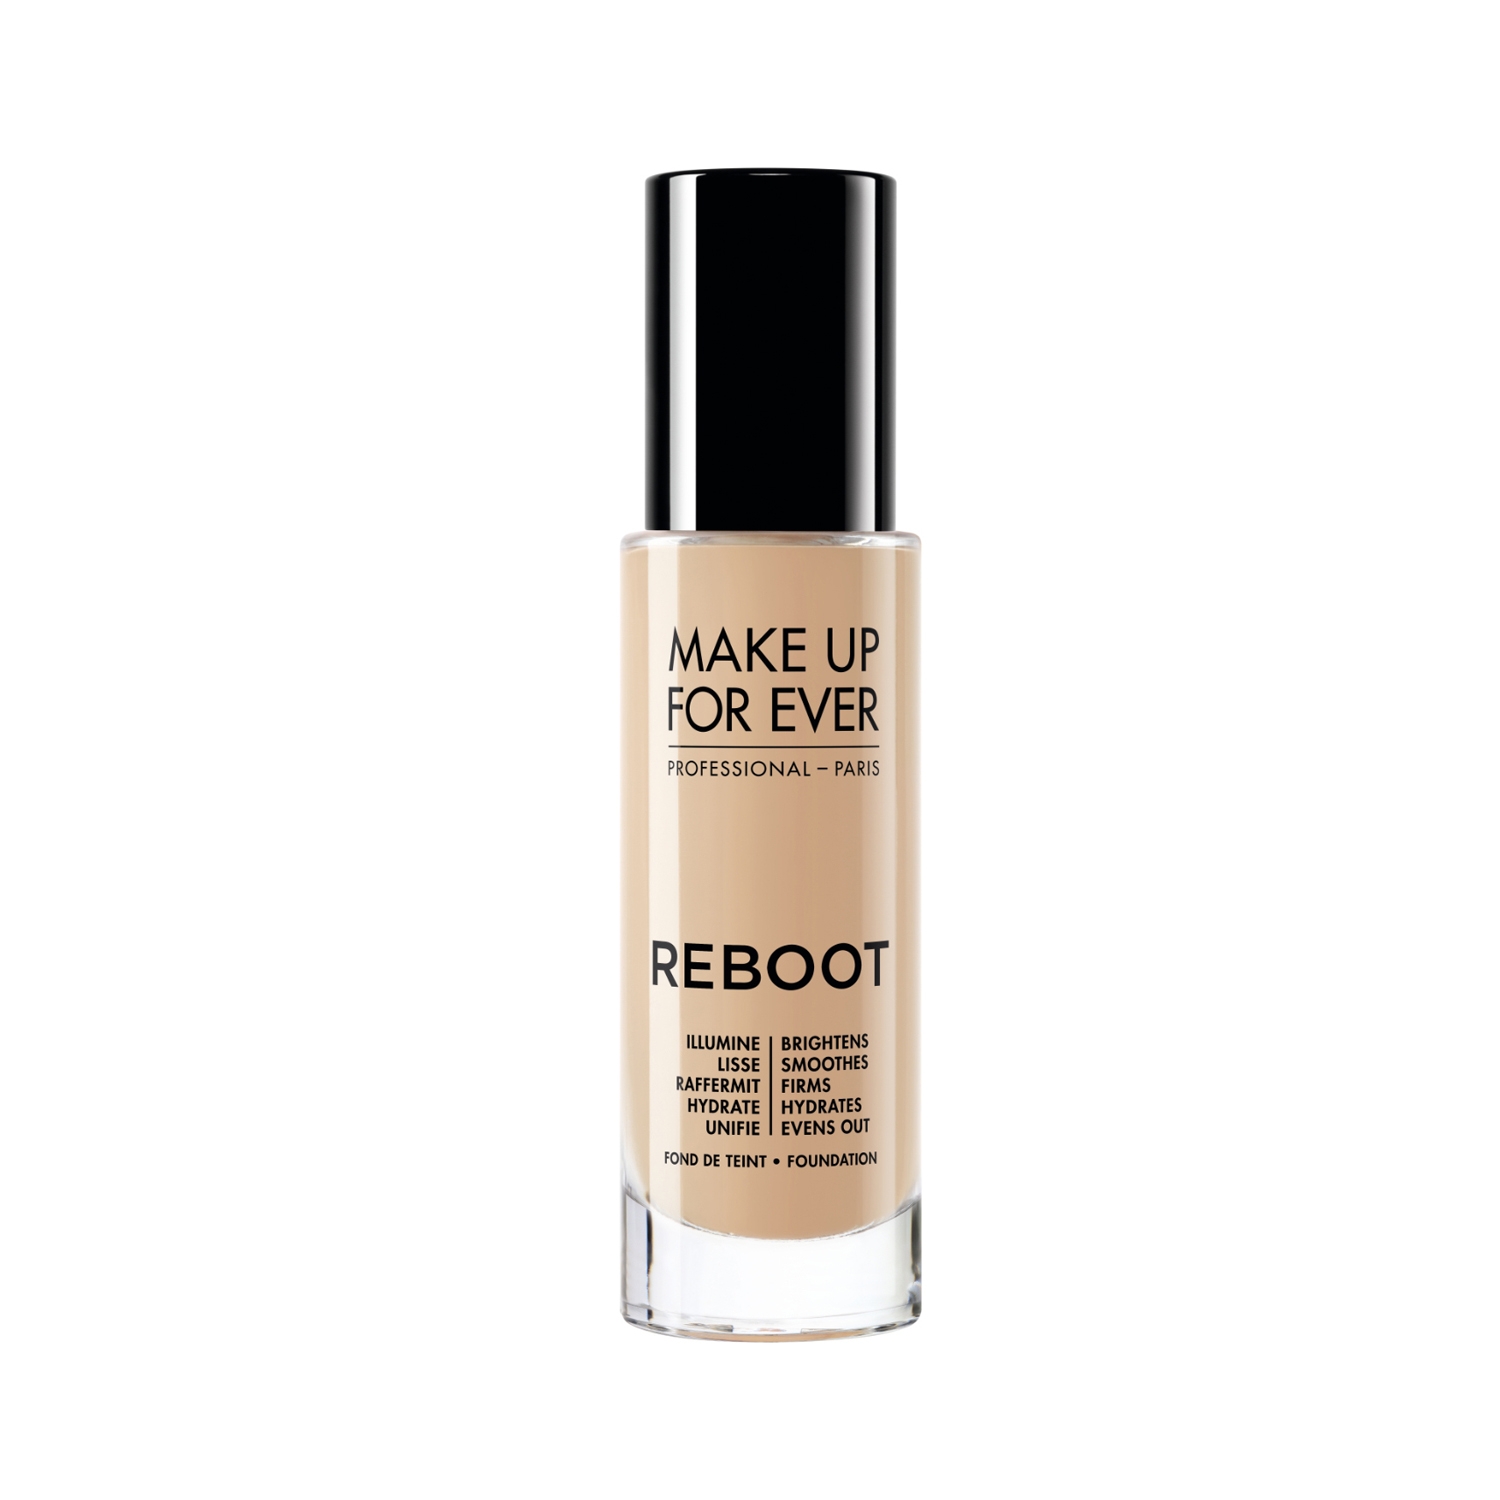 Make Up For Ever | Make Up For Ever Reboot Active Care-In-Foundation Y315 (30ml)